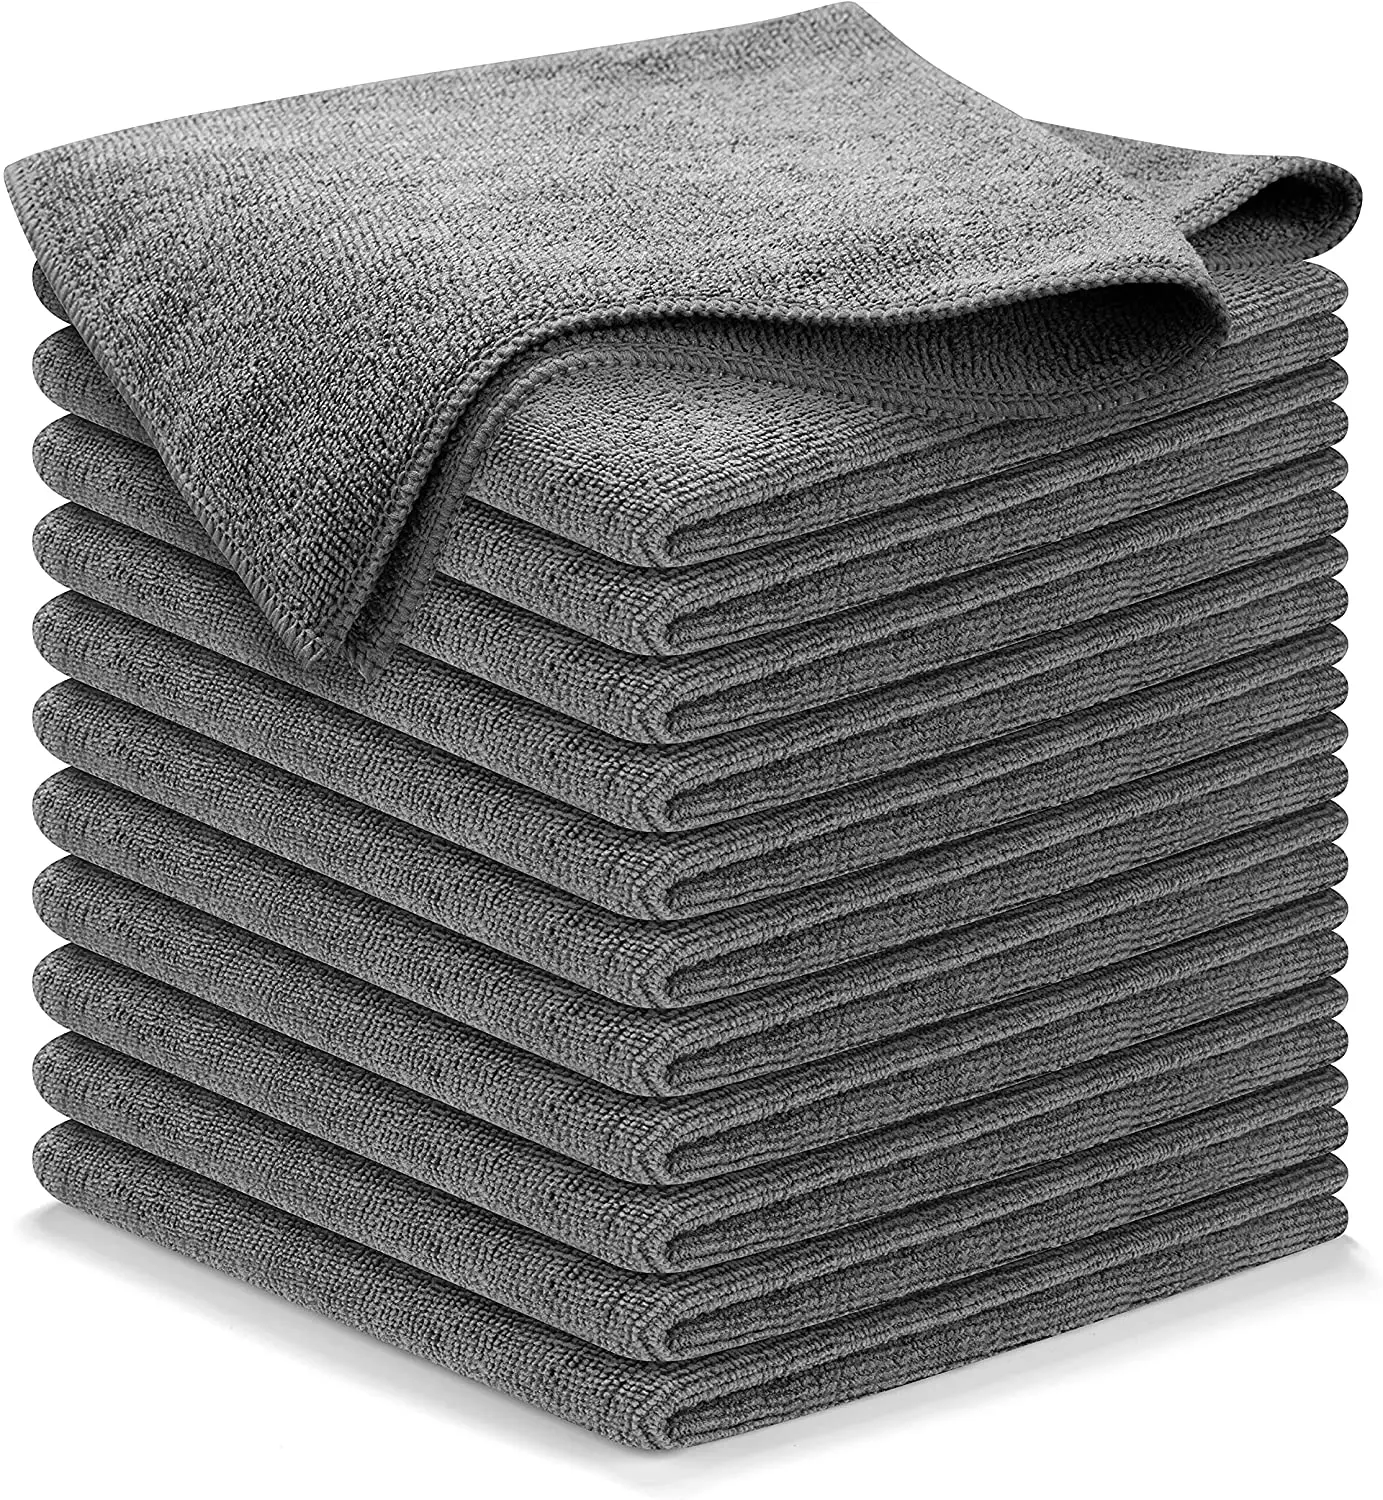 10PCS edgeless Microfiber Auto Cleaning Towels Multifunctional Car Detailing Towel Automotive Washing dry Cloth